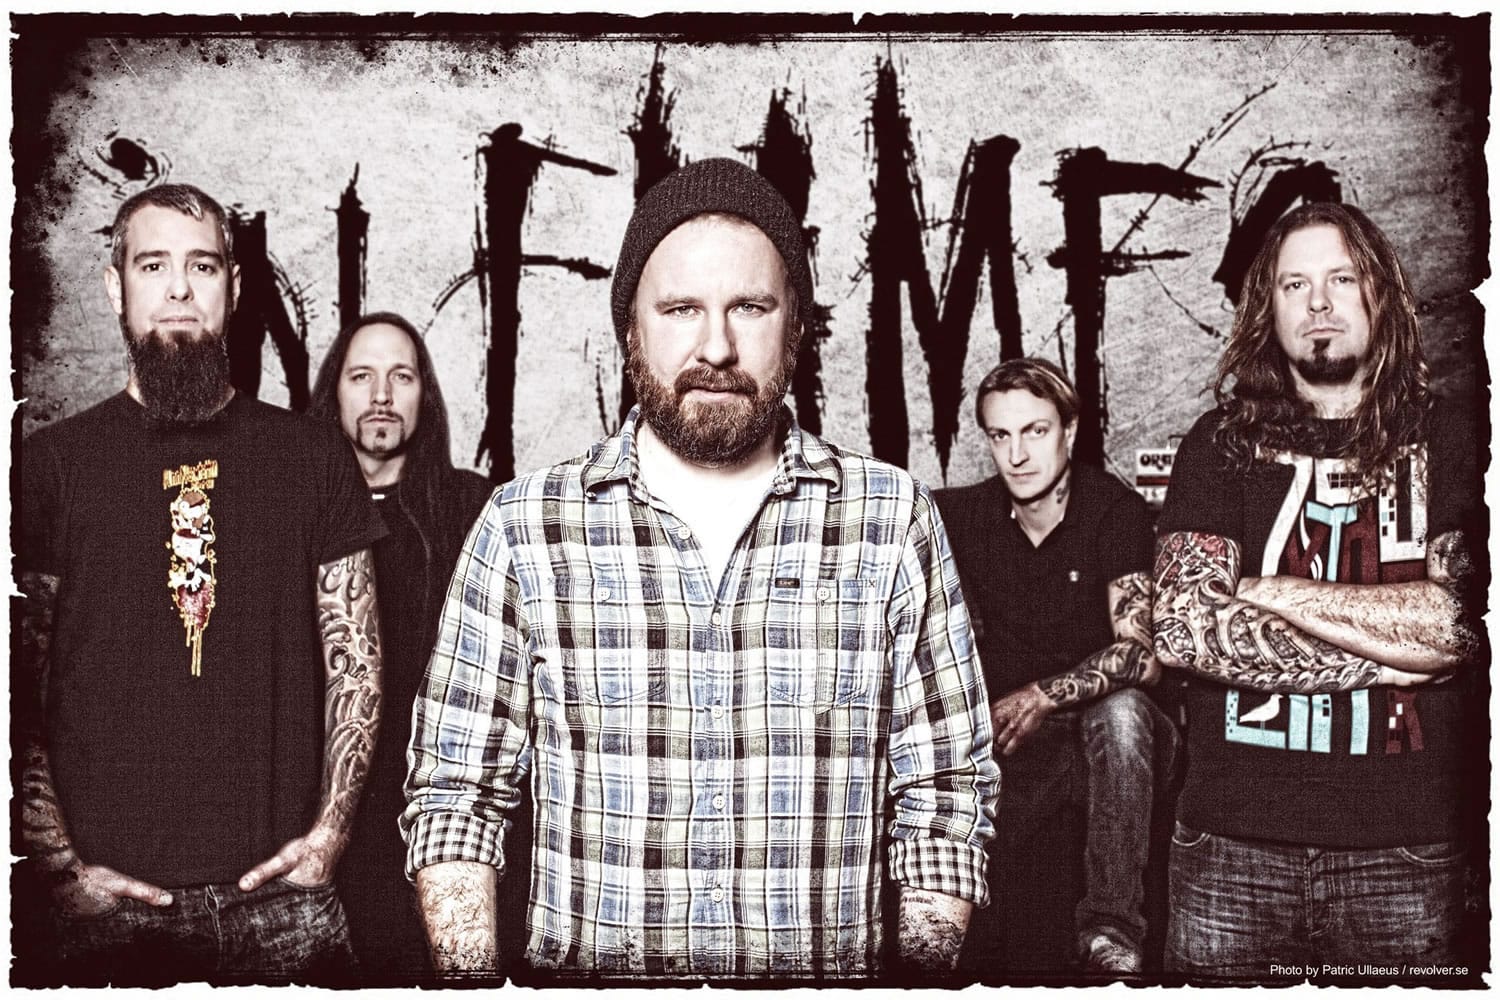 Swedish heavy metal band In Flames will perform Feb.